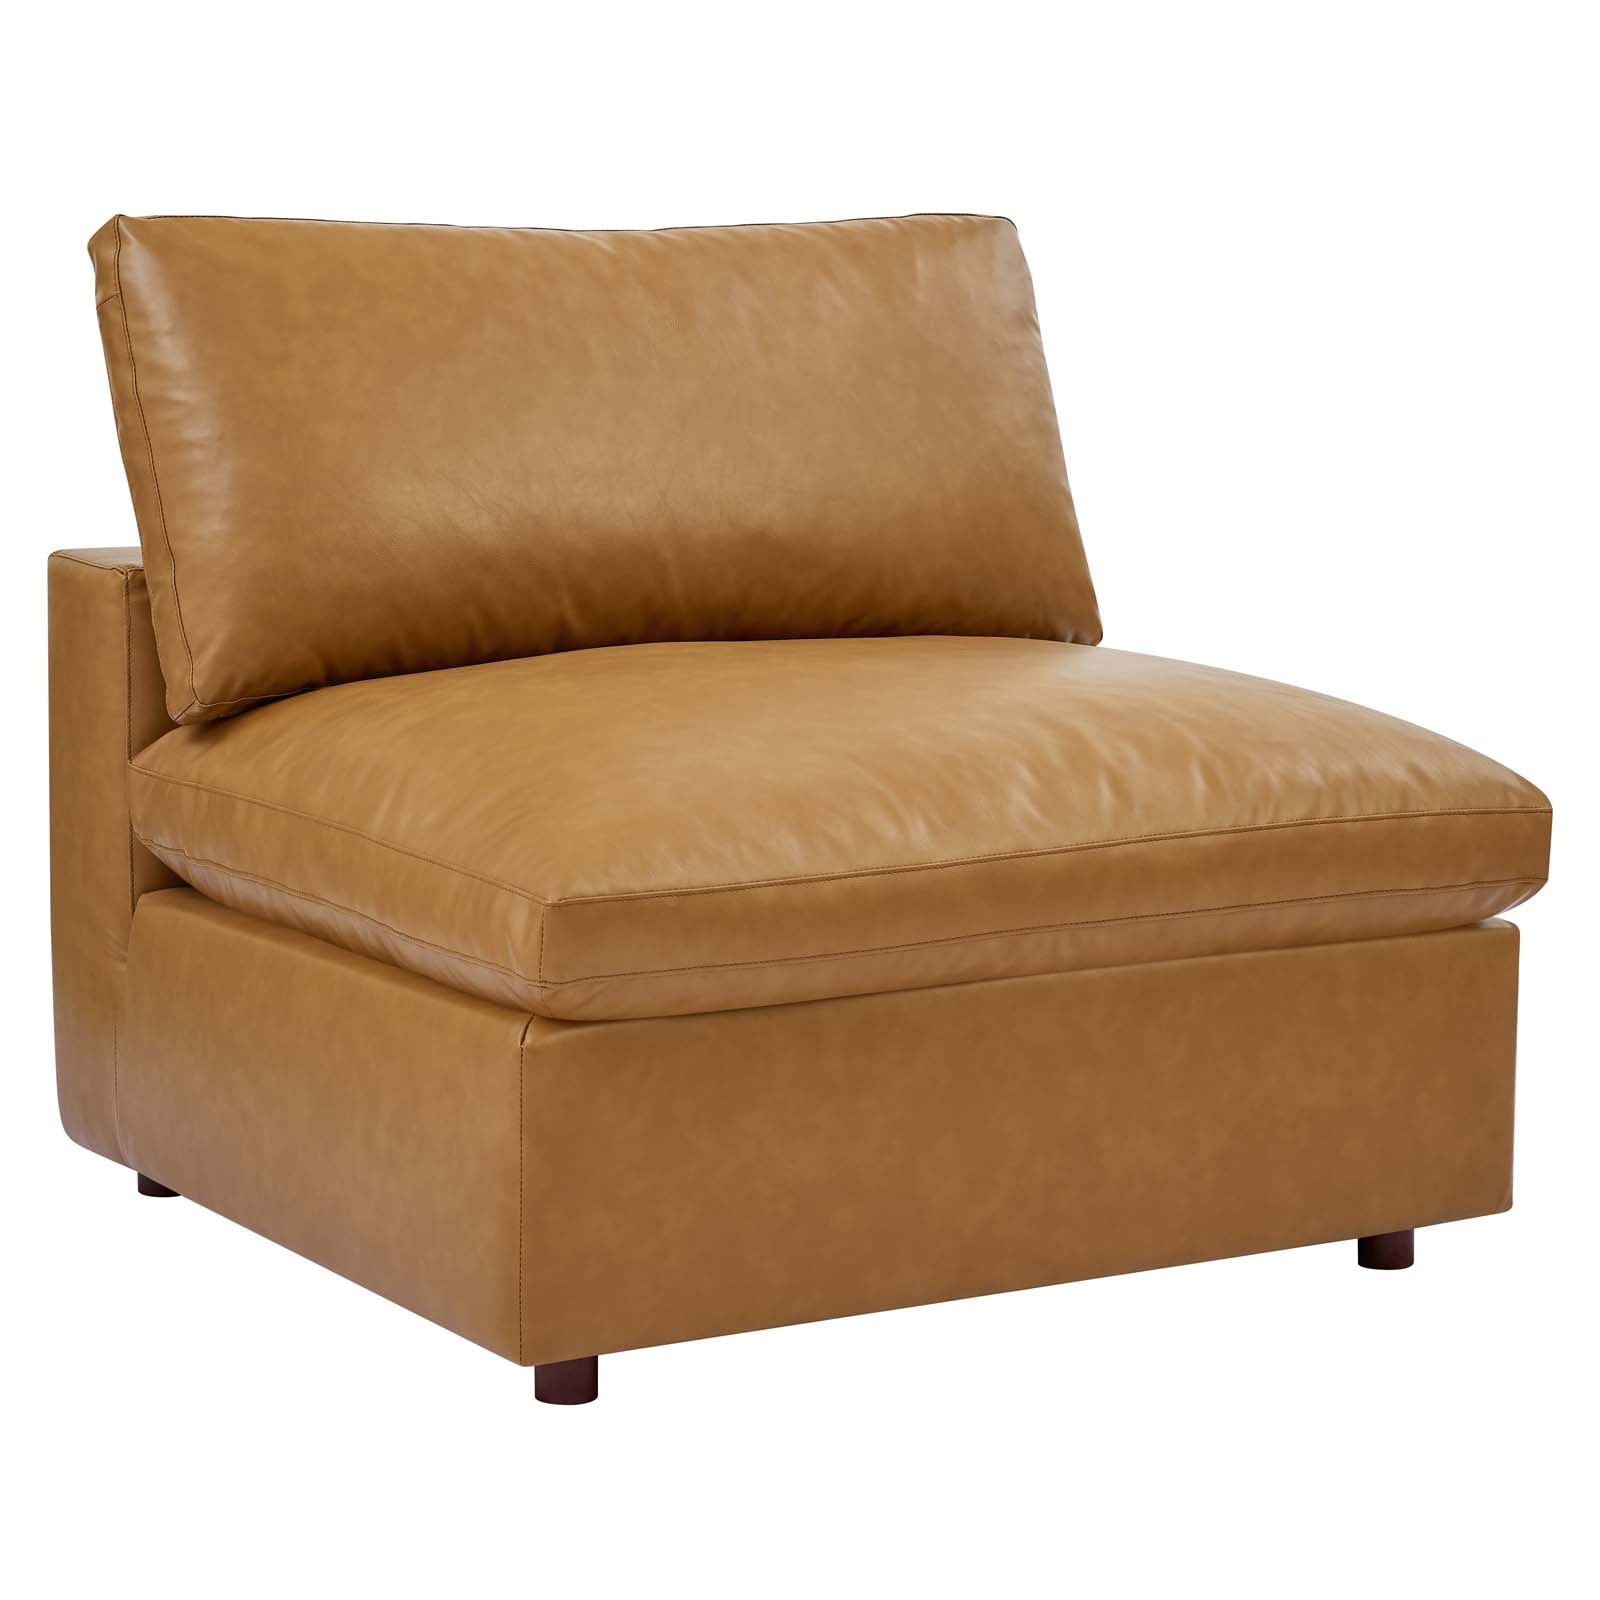 Modway Sectional Sofas - Commix Down Filled Overstuffed Vegan Leather 5 Piece Sectional Sofa Tan